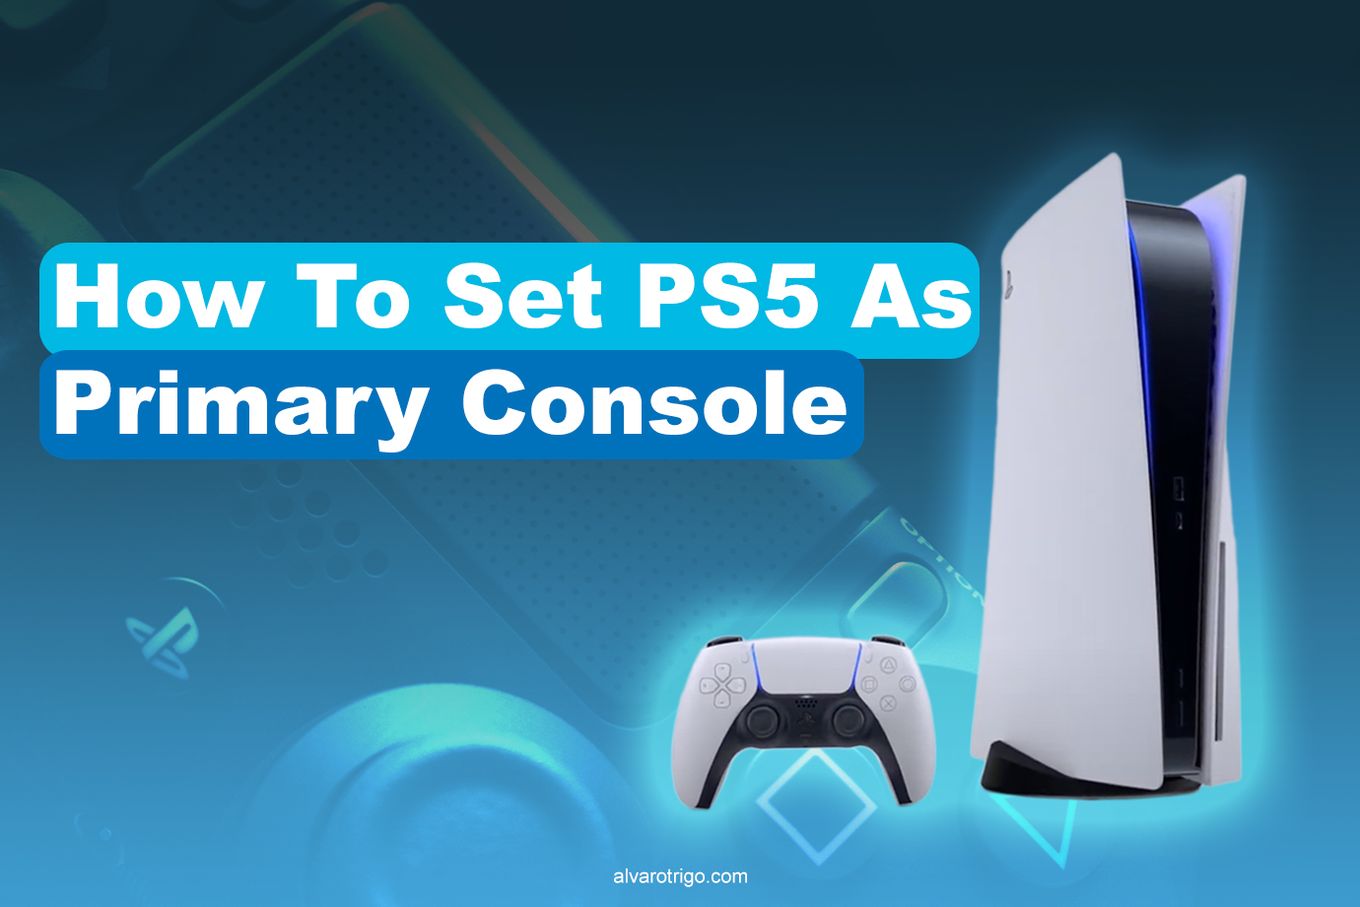 PS5 accounts - How to add new accounts, switch users, guest, remove  accounts and Quick Play on the PlayStation 5 explained